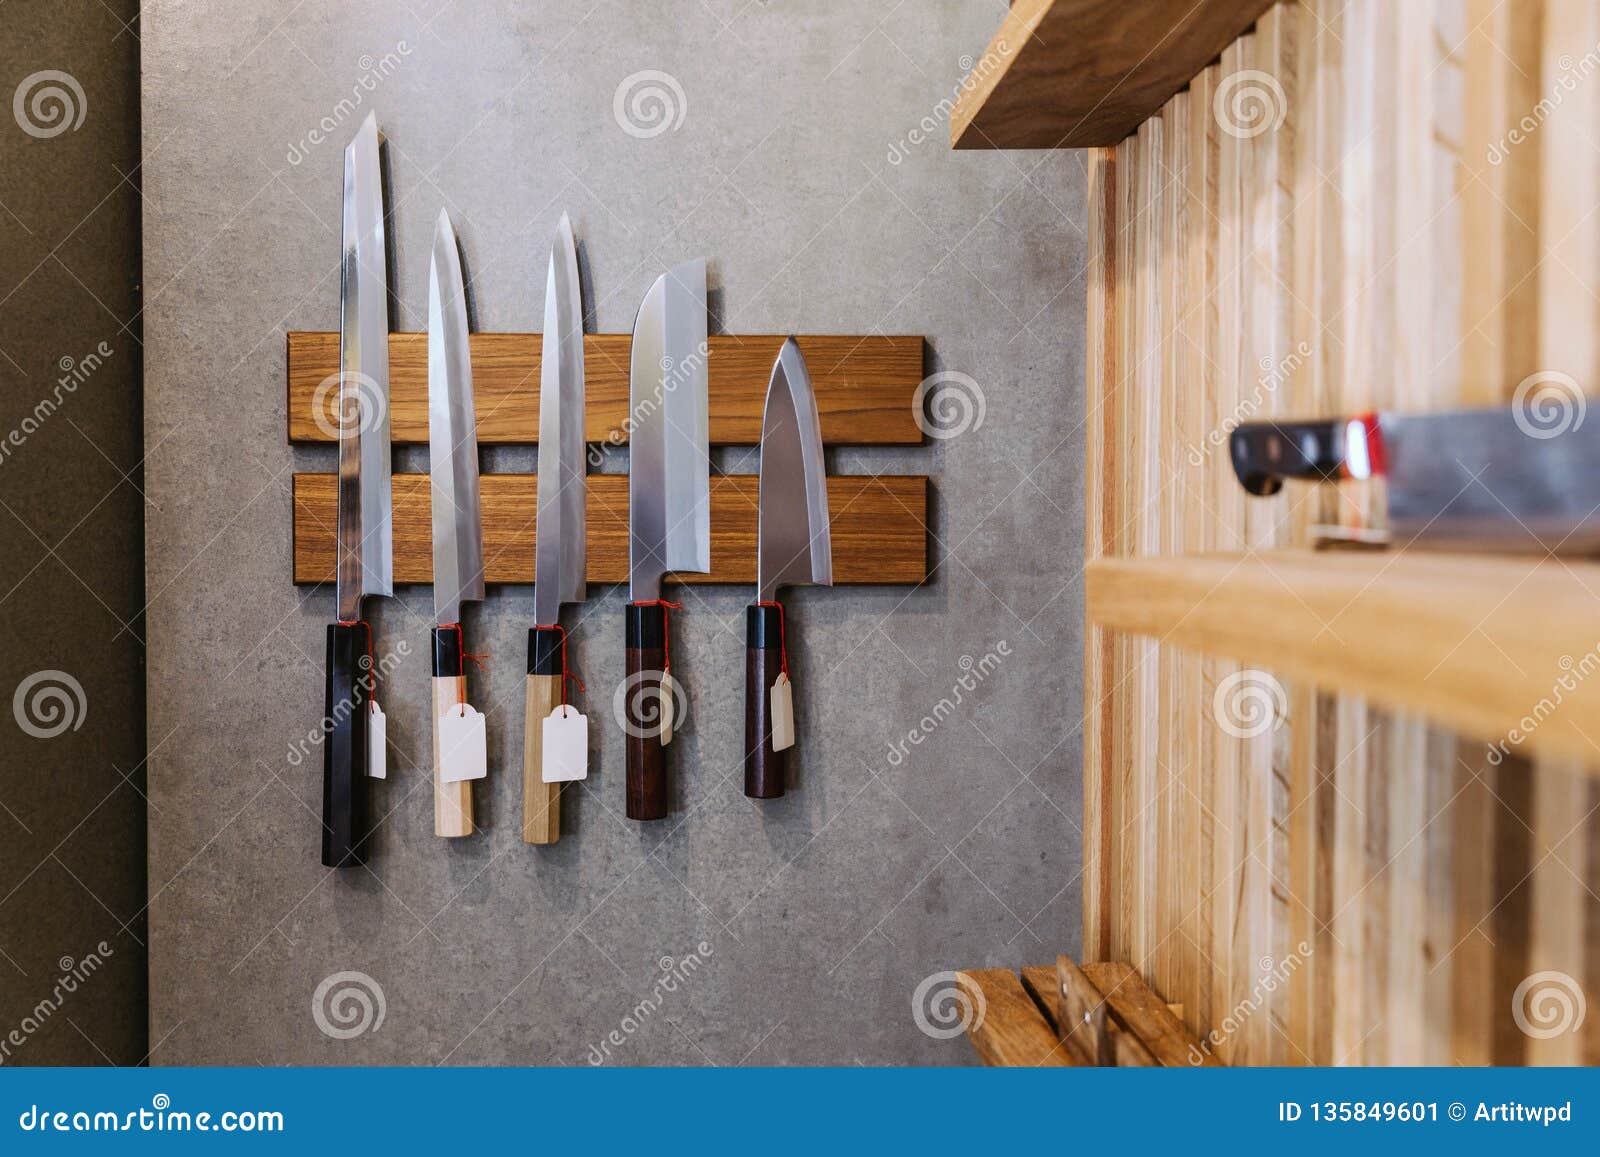 sharp japanese kitchen knives with empty price tag stick on magnet cover with wood on concrete wall